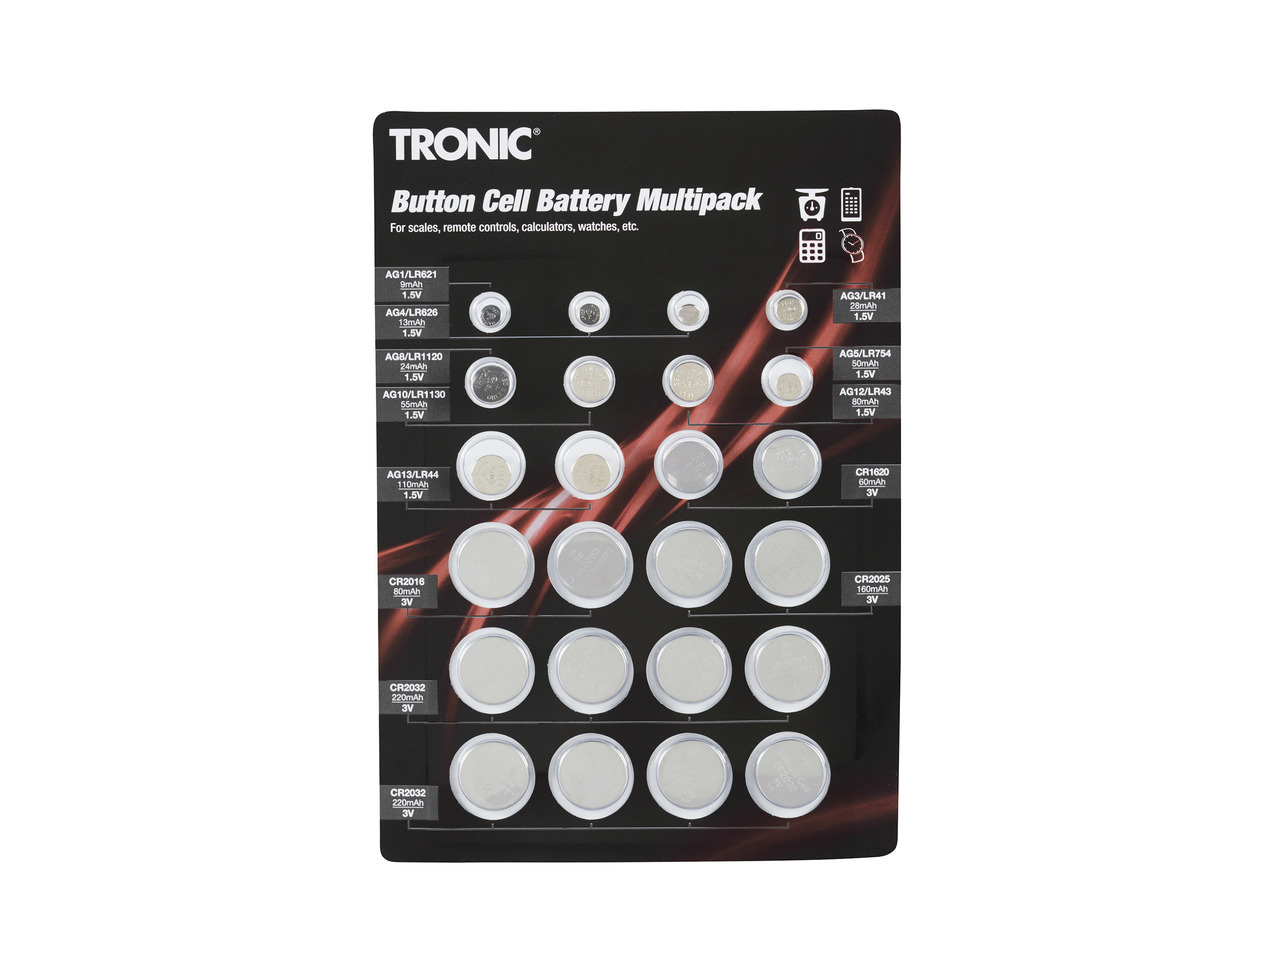 Tronic Button Cell Battery Multipack1